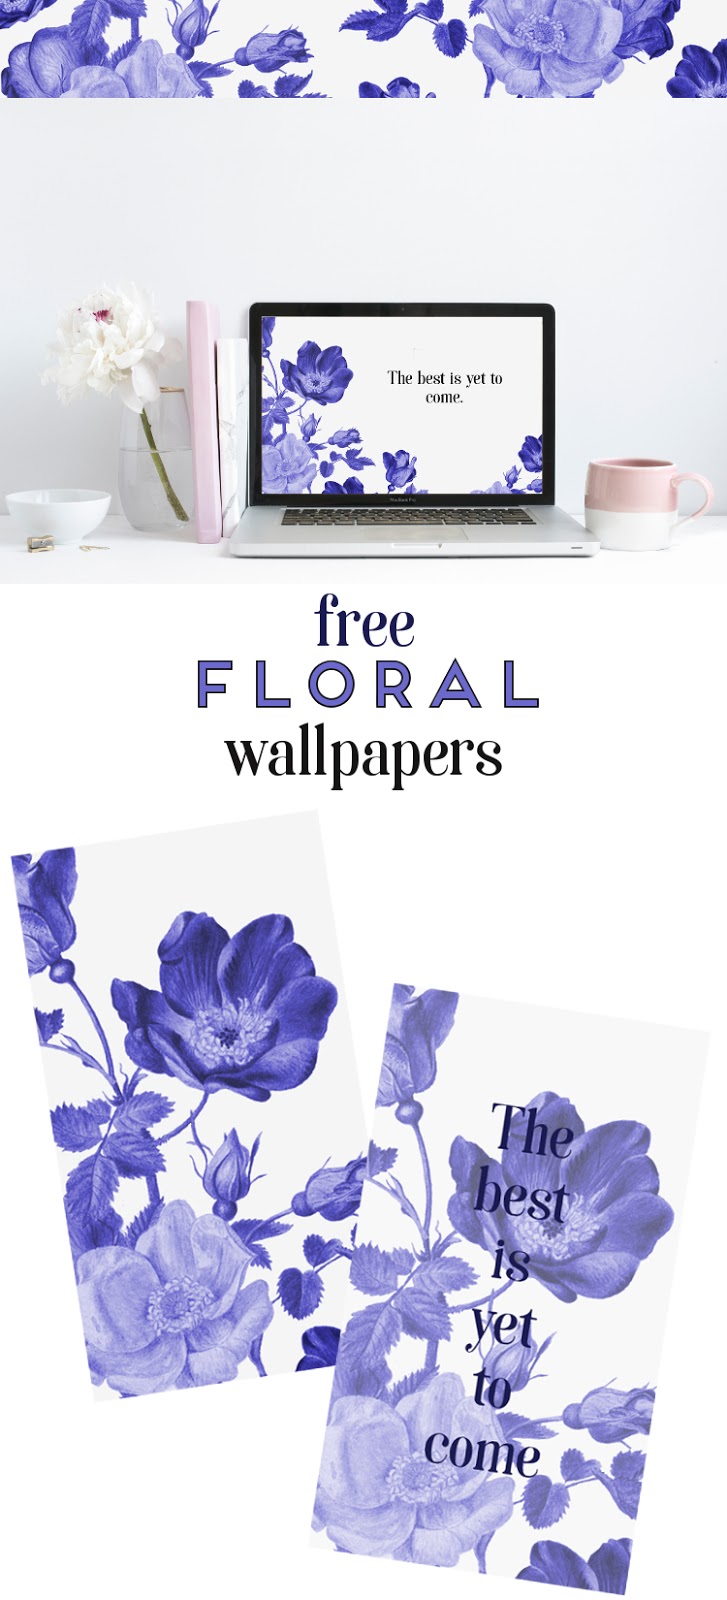 FREE INKY BLUE FLORAL WALLPAPERS.